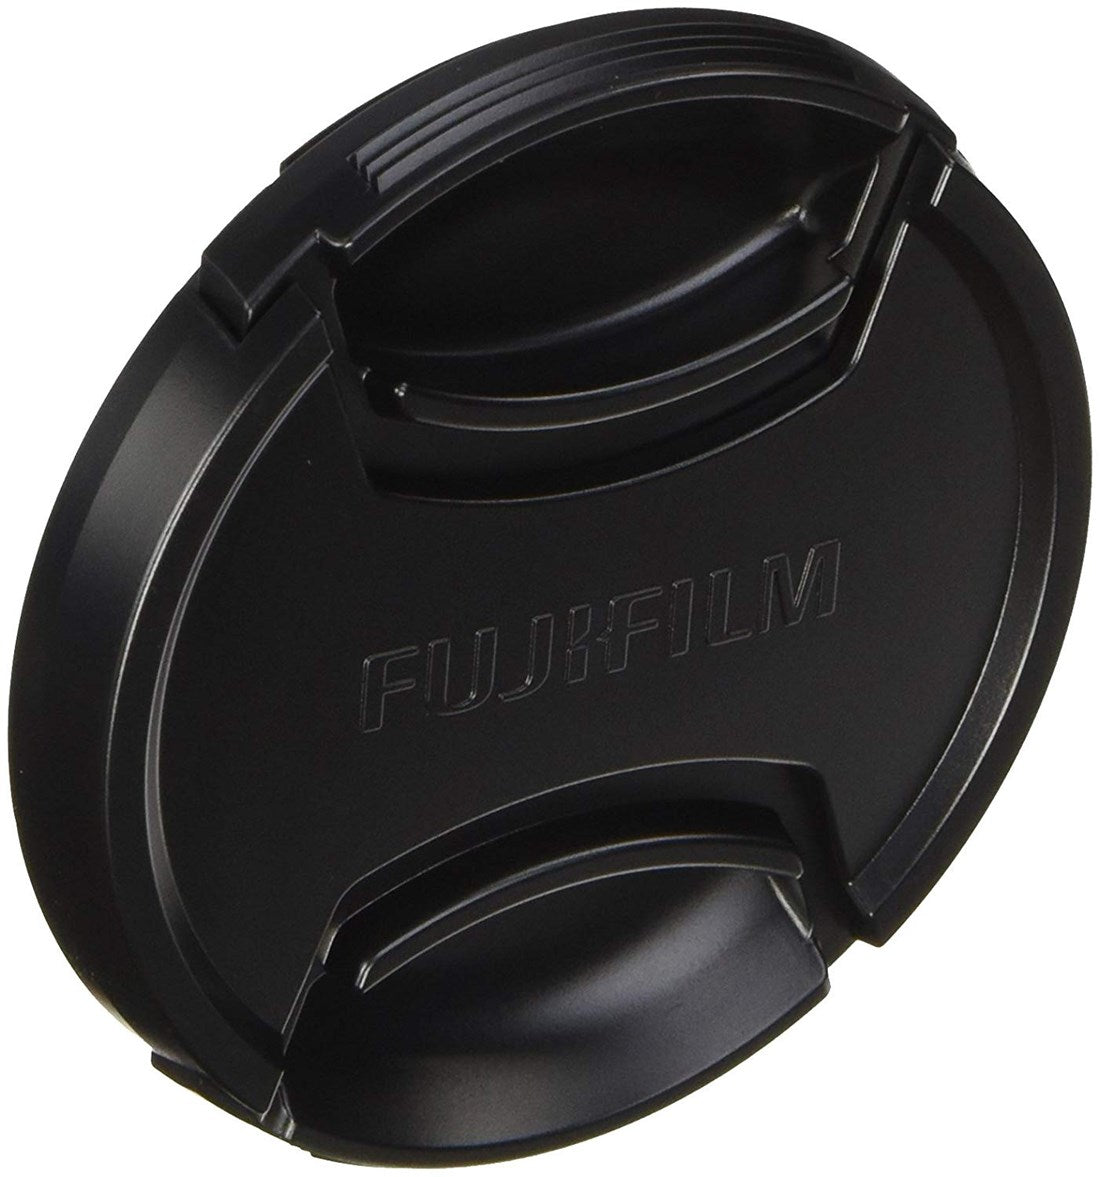 Product Image of Fujifilm 58mm Front Lens Cap for 18-55,14mm,16-50mm Lenses